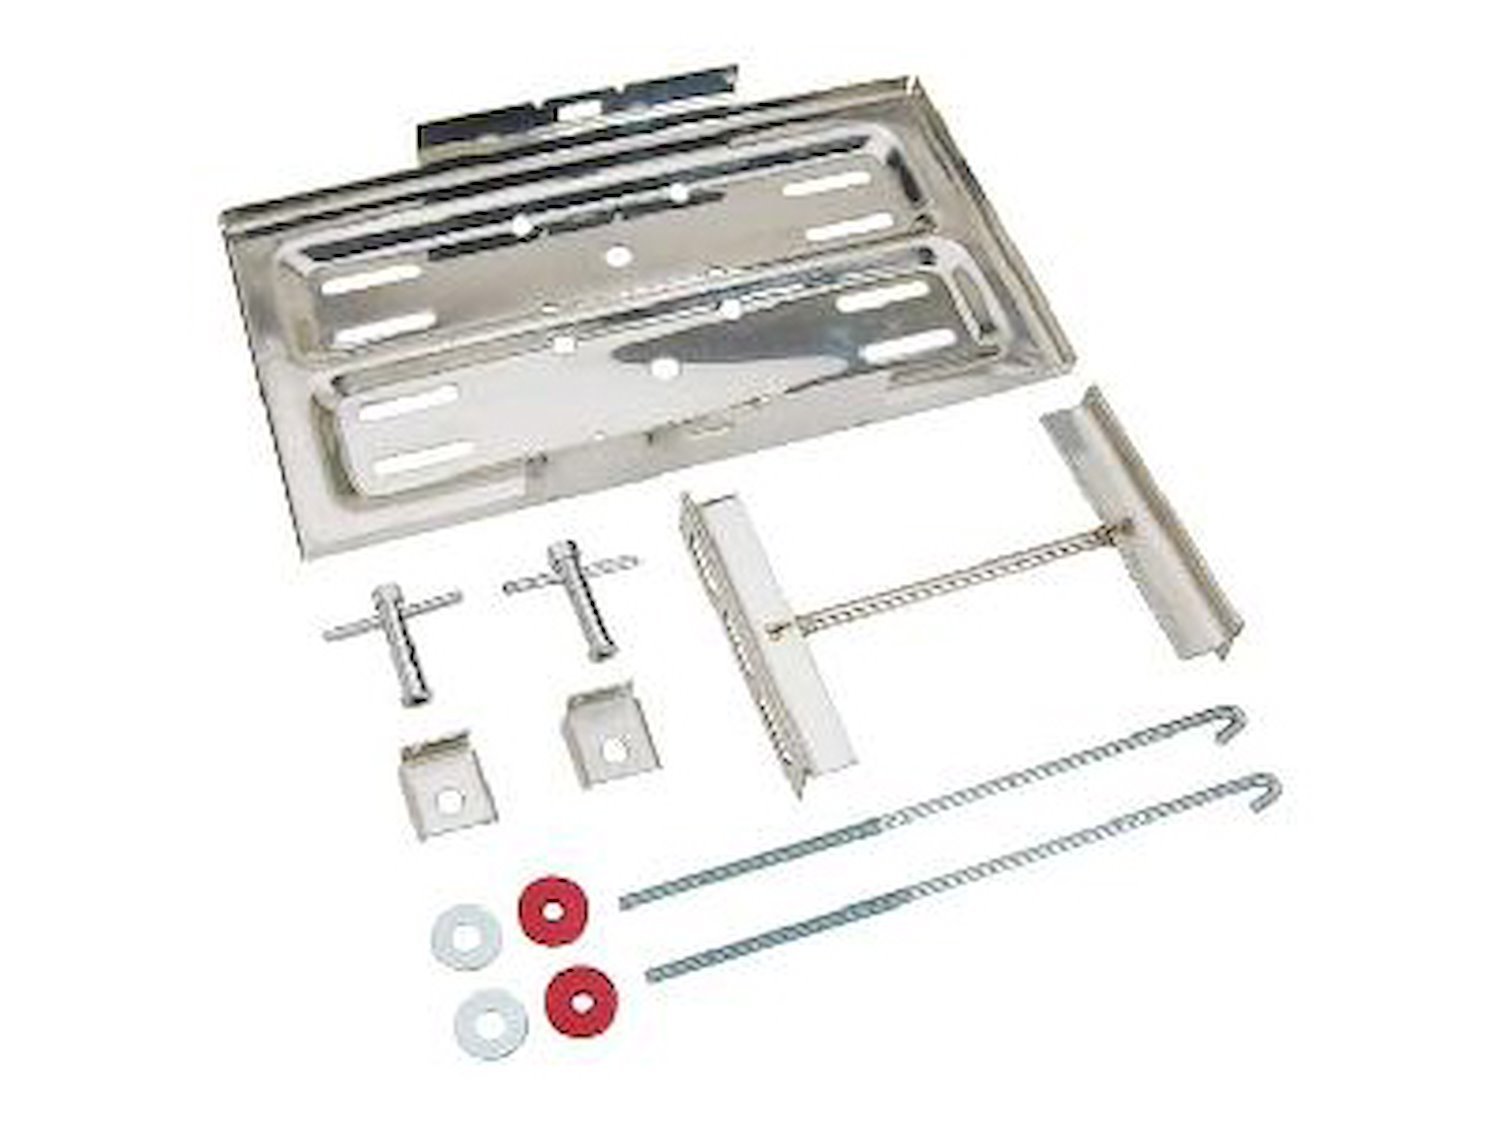 JEGS Stainless Steel Battery Tray Kit for Group 24, 27 and 74 Batteries [7  in. x 13 in.]